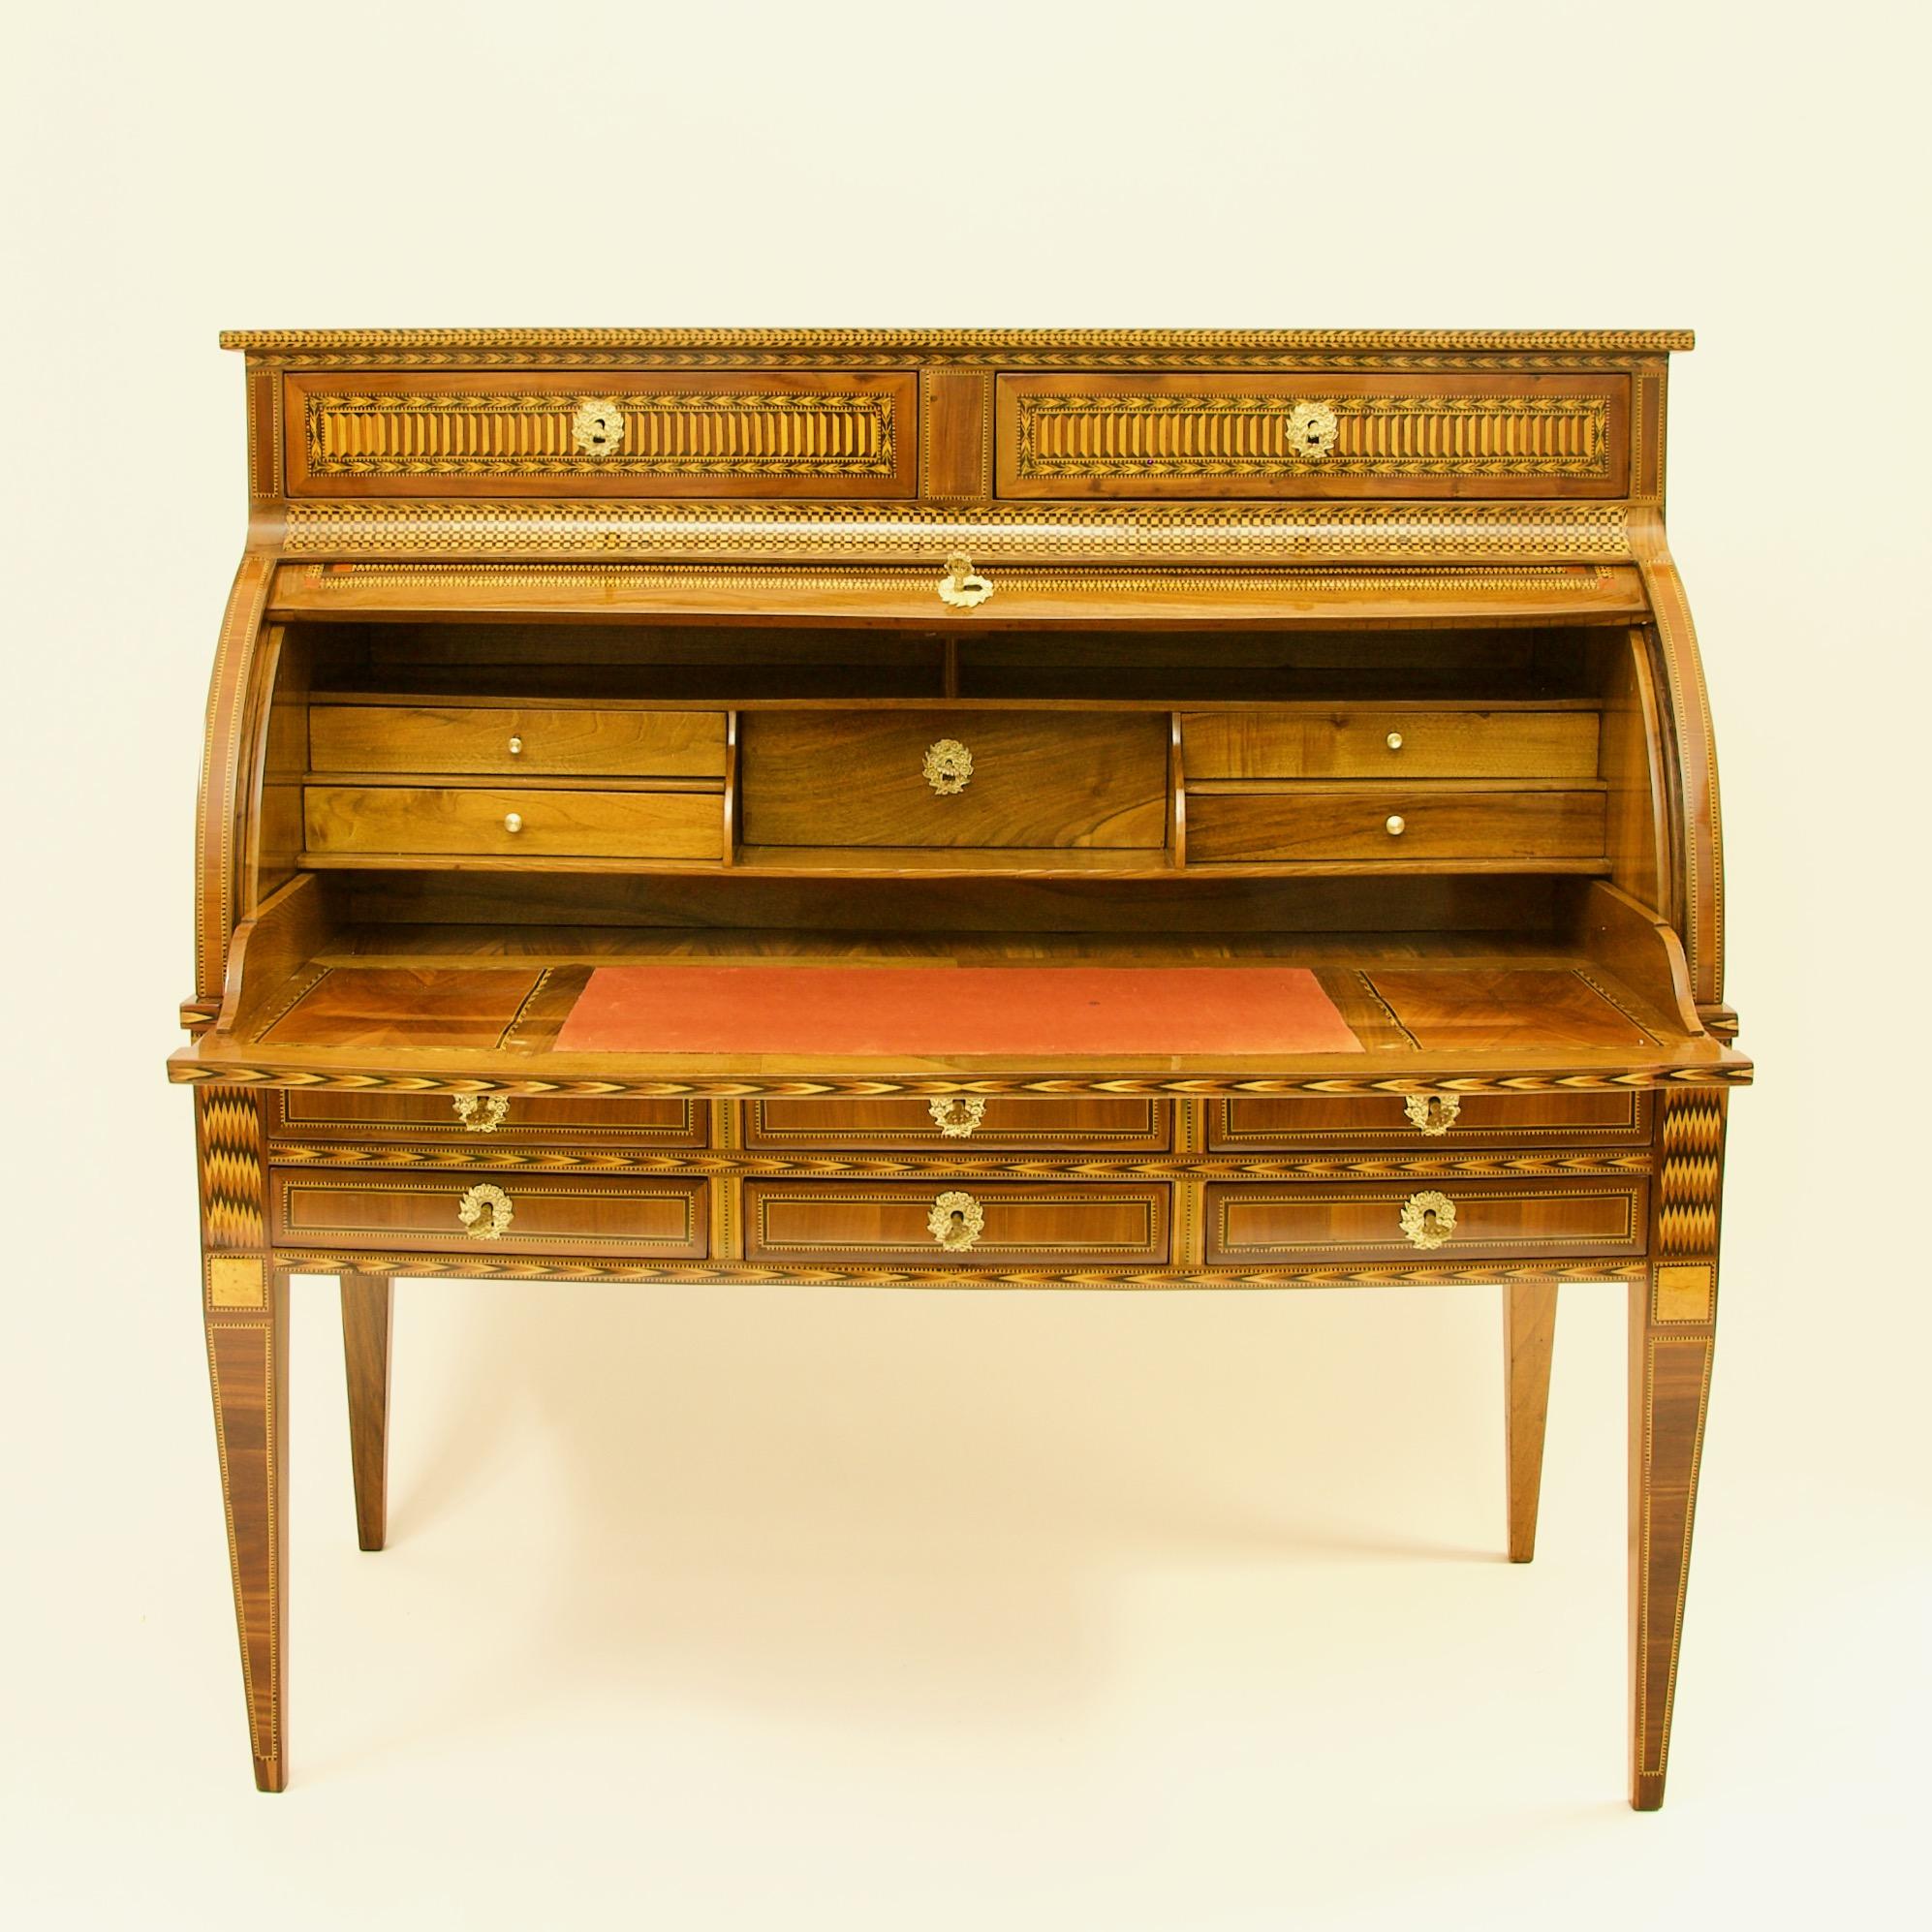 Gilt French 18th Century Large Louis XVI Marquetry Desk or Bureau à Cylindre For Sale